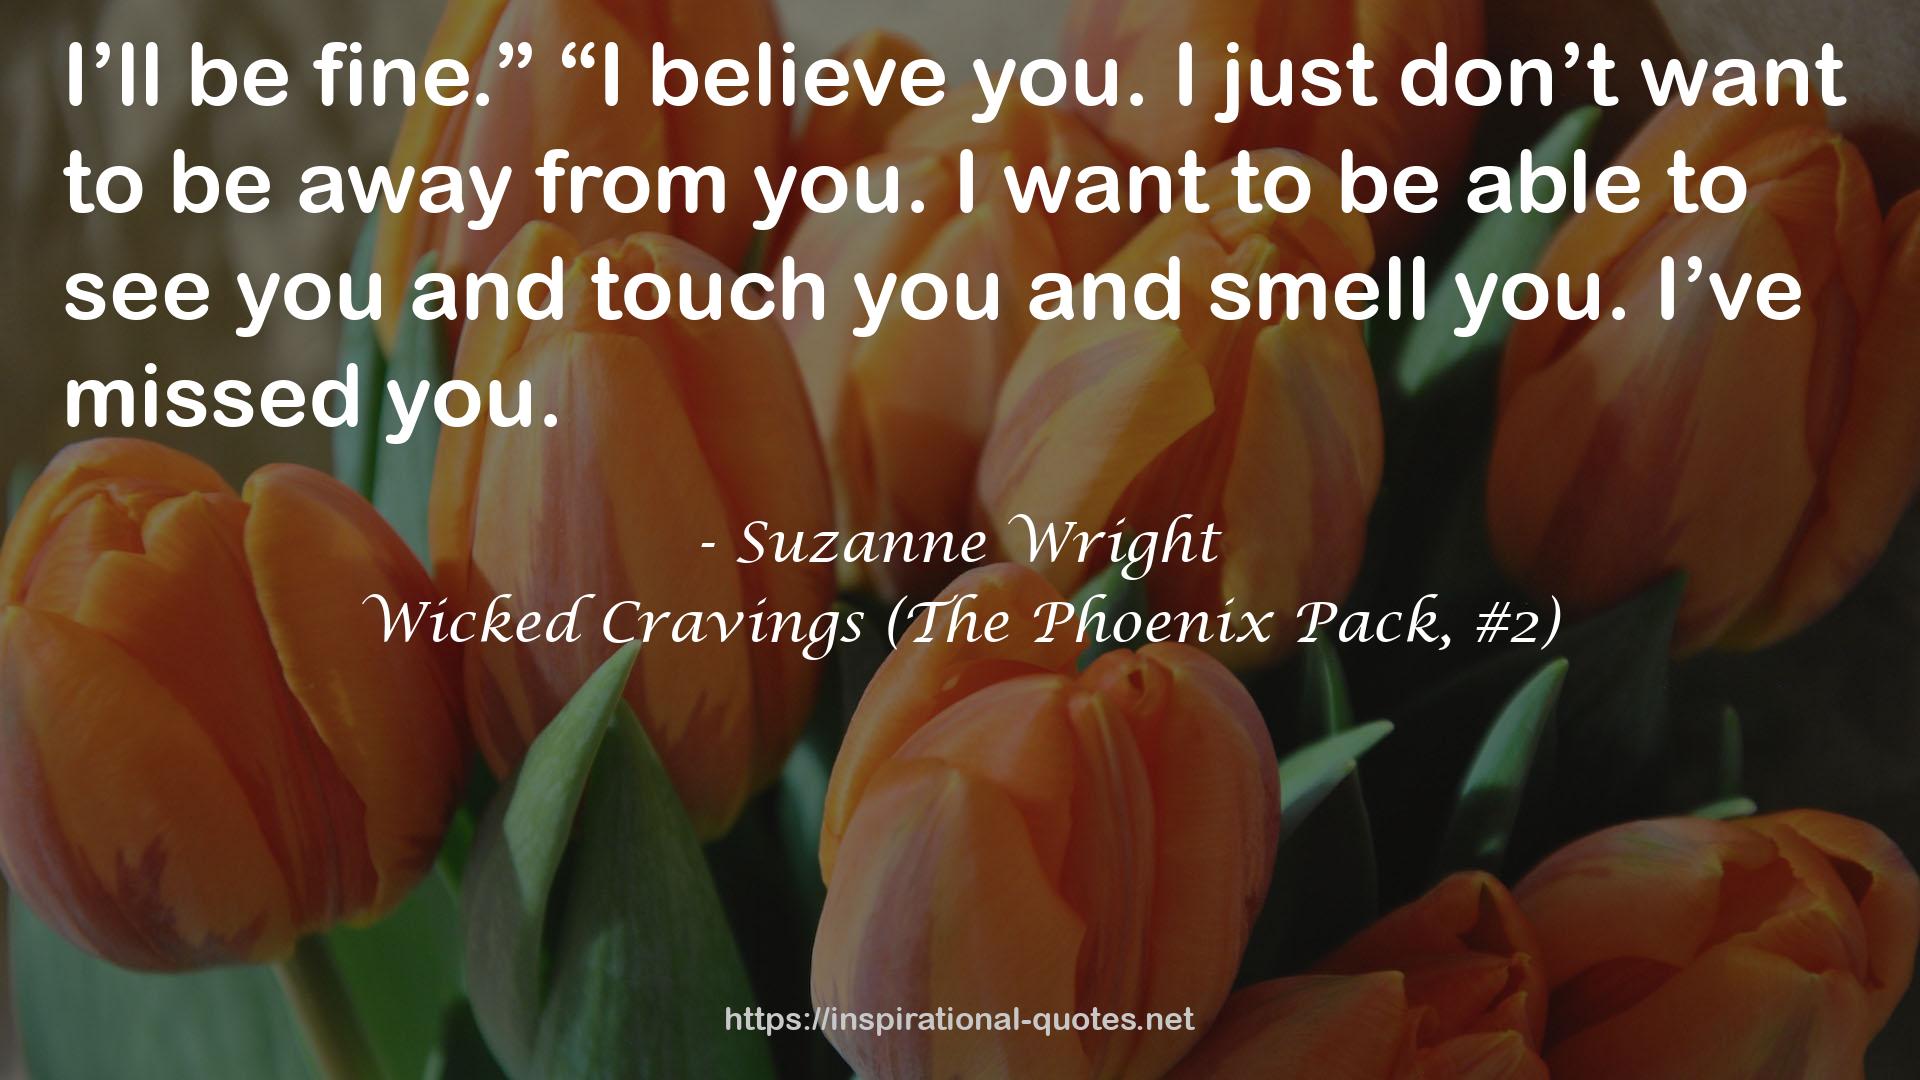 Wicked Cravings (The Phoenix Pack, #2) QUOTES